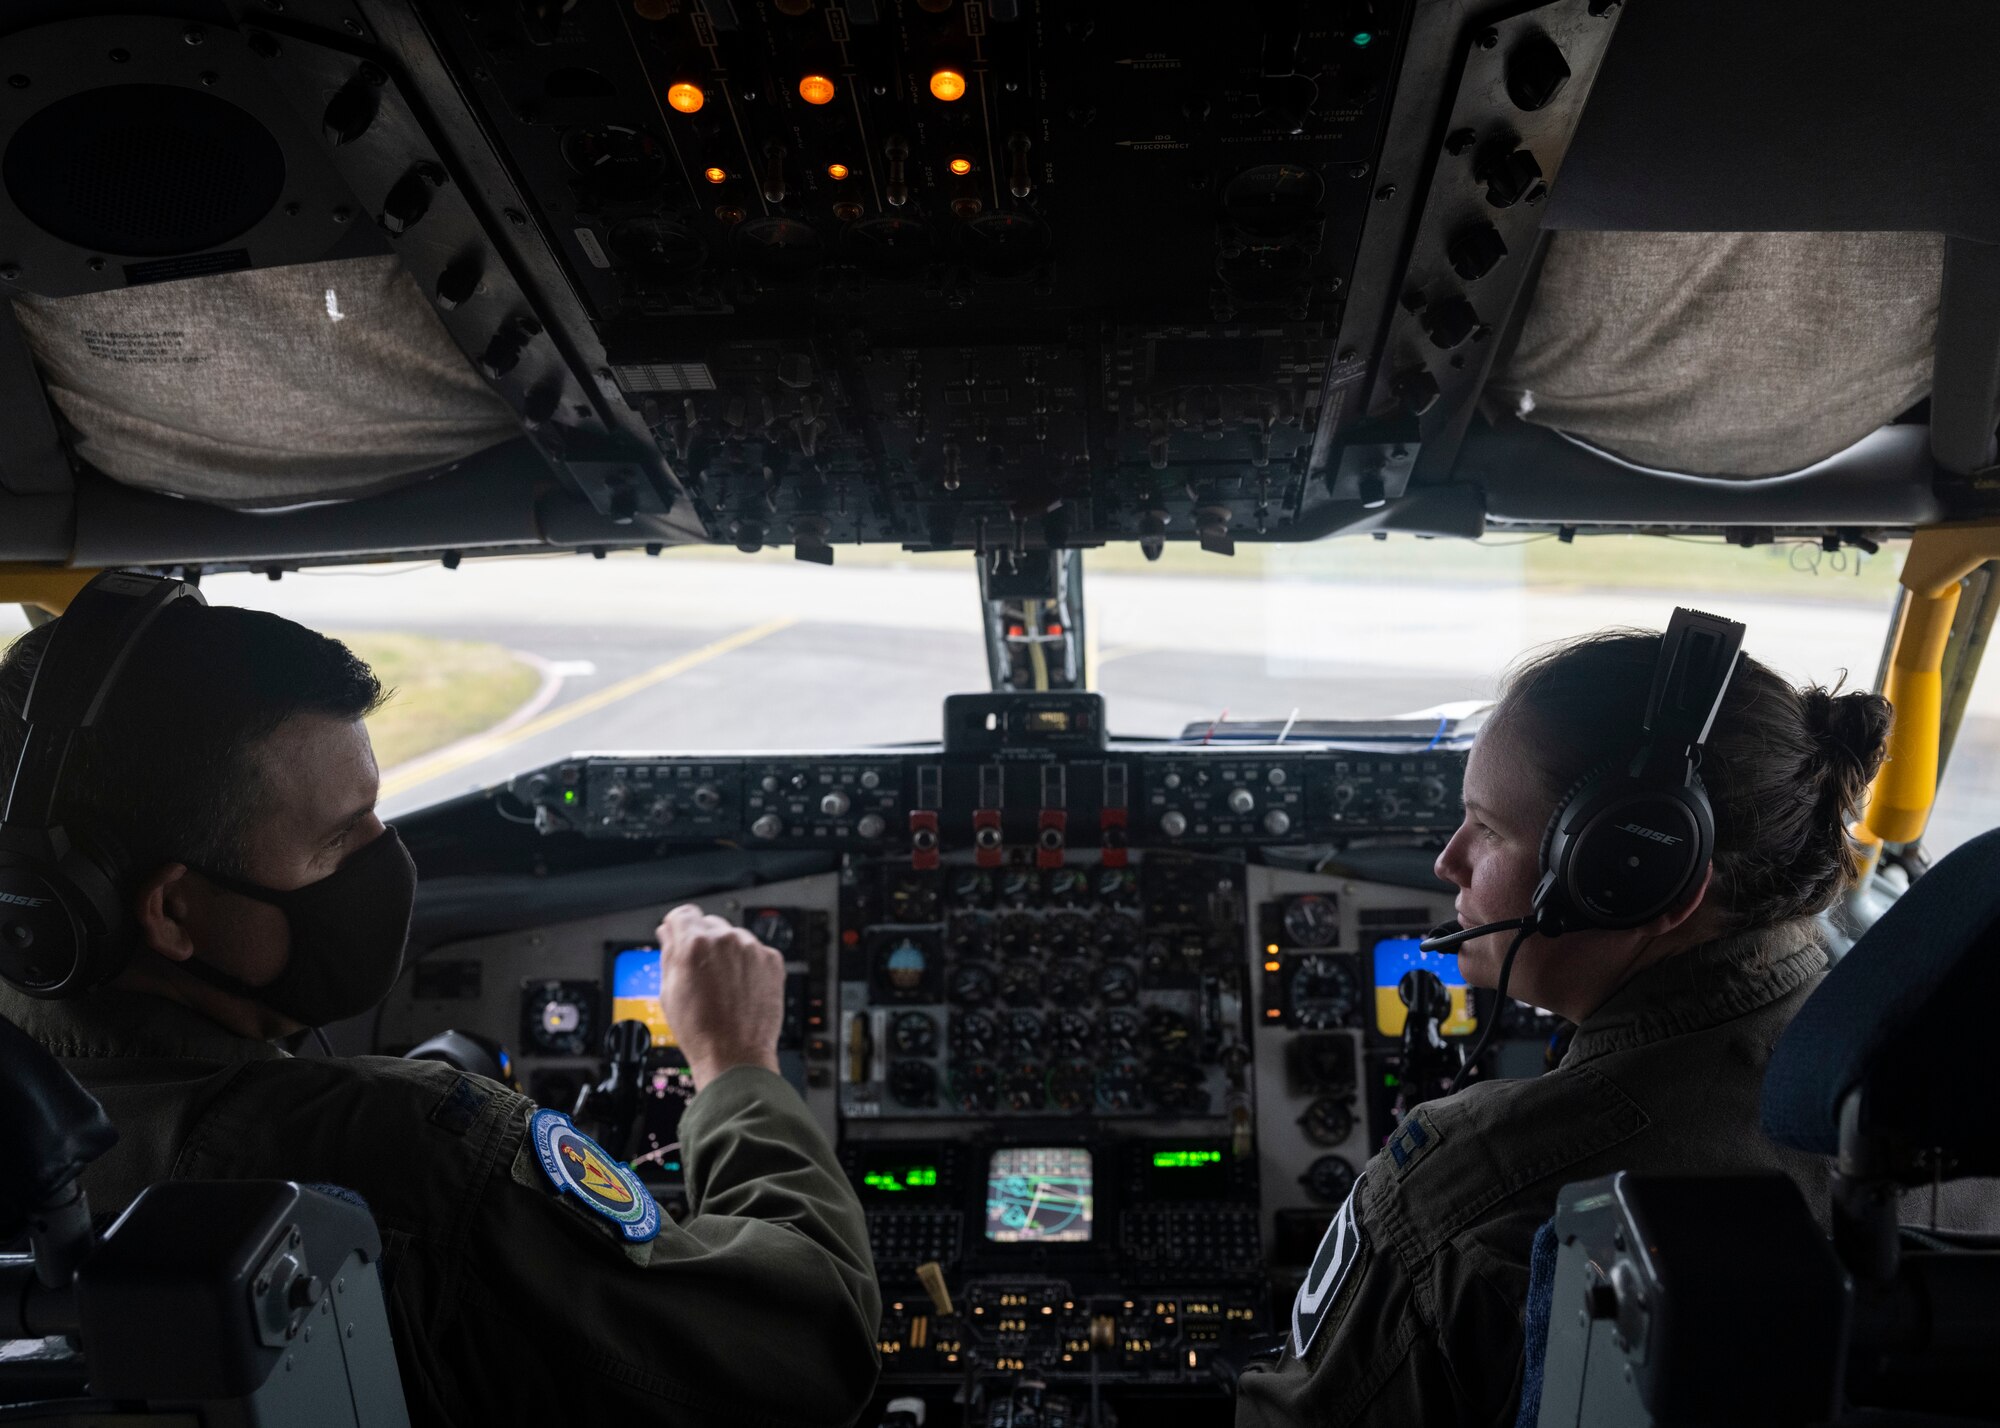 U.S. Air Force Col. Gene Jacobus, 100th Air Refueling Wing commander, conducts preflight operations in a KC-135 Stratotanker aircraft prior to his first flight as commander of the 100th Air Refueling Wing at Royal Air Force Mildenhall, England, Sept. 1, 2021. The 100th ARW is the only permanent U.S. air refueling wing in the European theater, providing the critical air refueling “bridge” which allows the Expeditionary Air Force to deploy around the globe at moment’s notice. (U.S. Air Force photo by Airman Alvaro Villagomez)